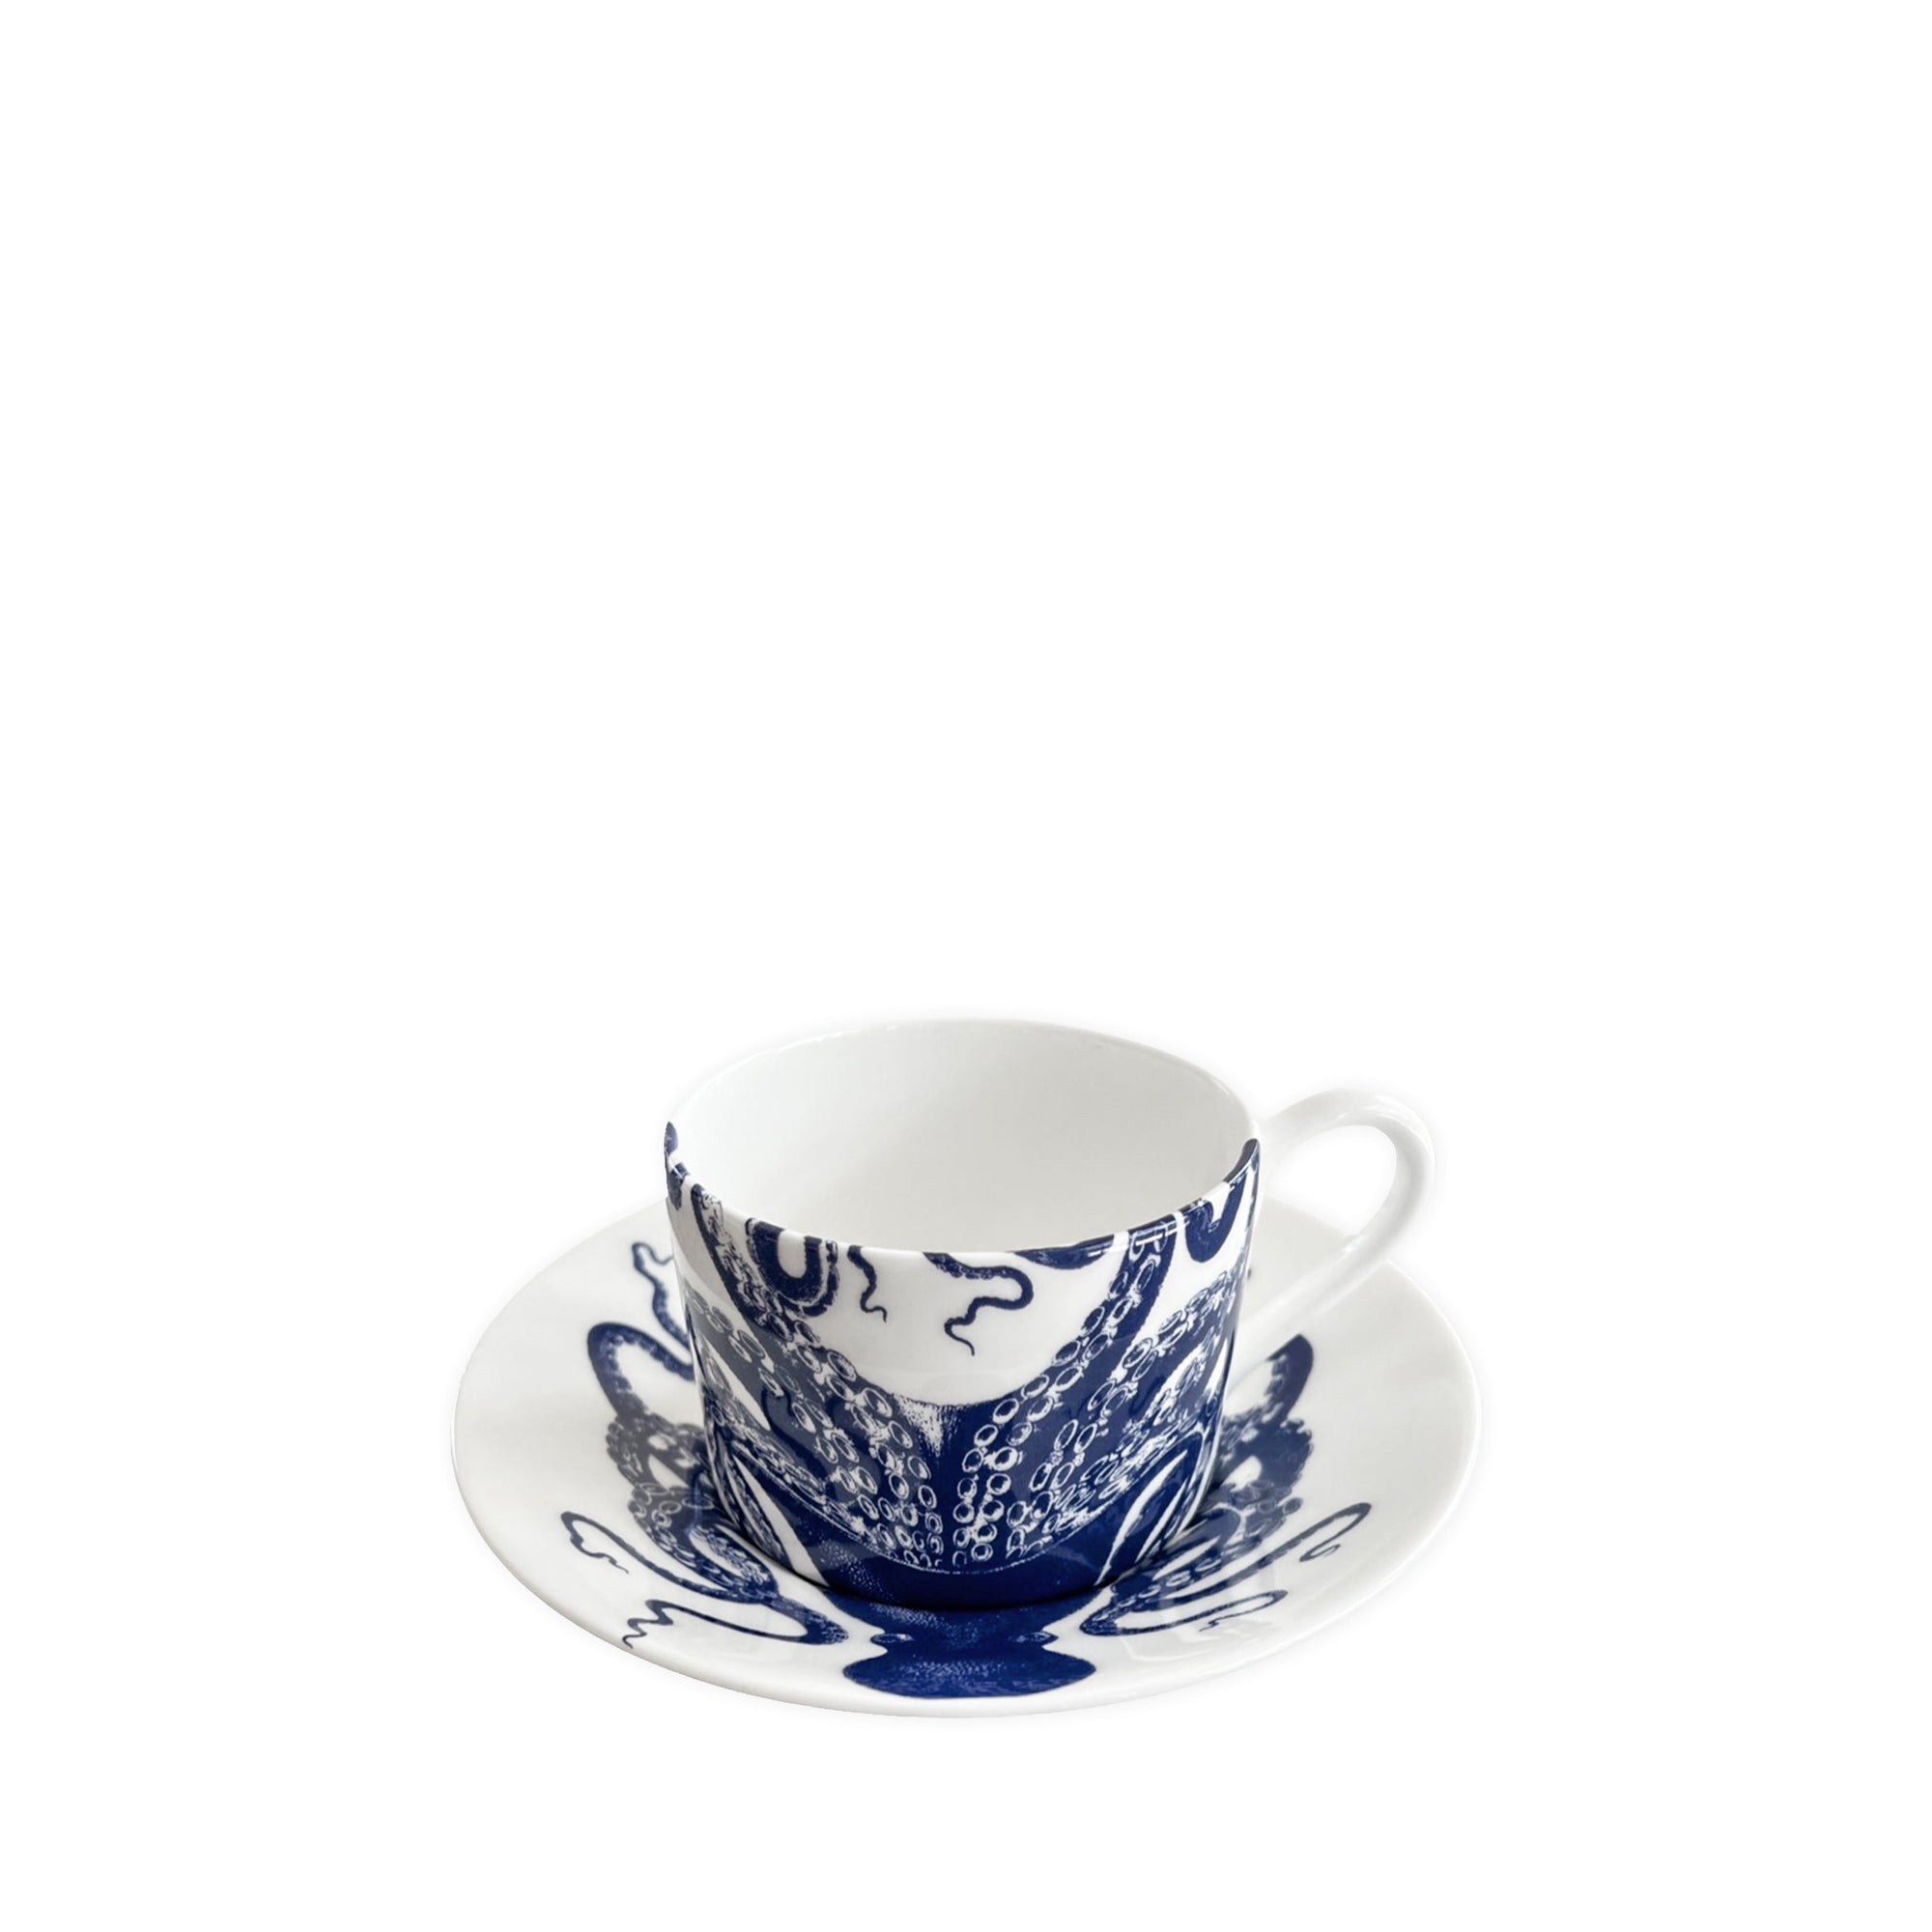 Blue Lucy Bone China Teacup and Saucer Set from Caskata.